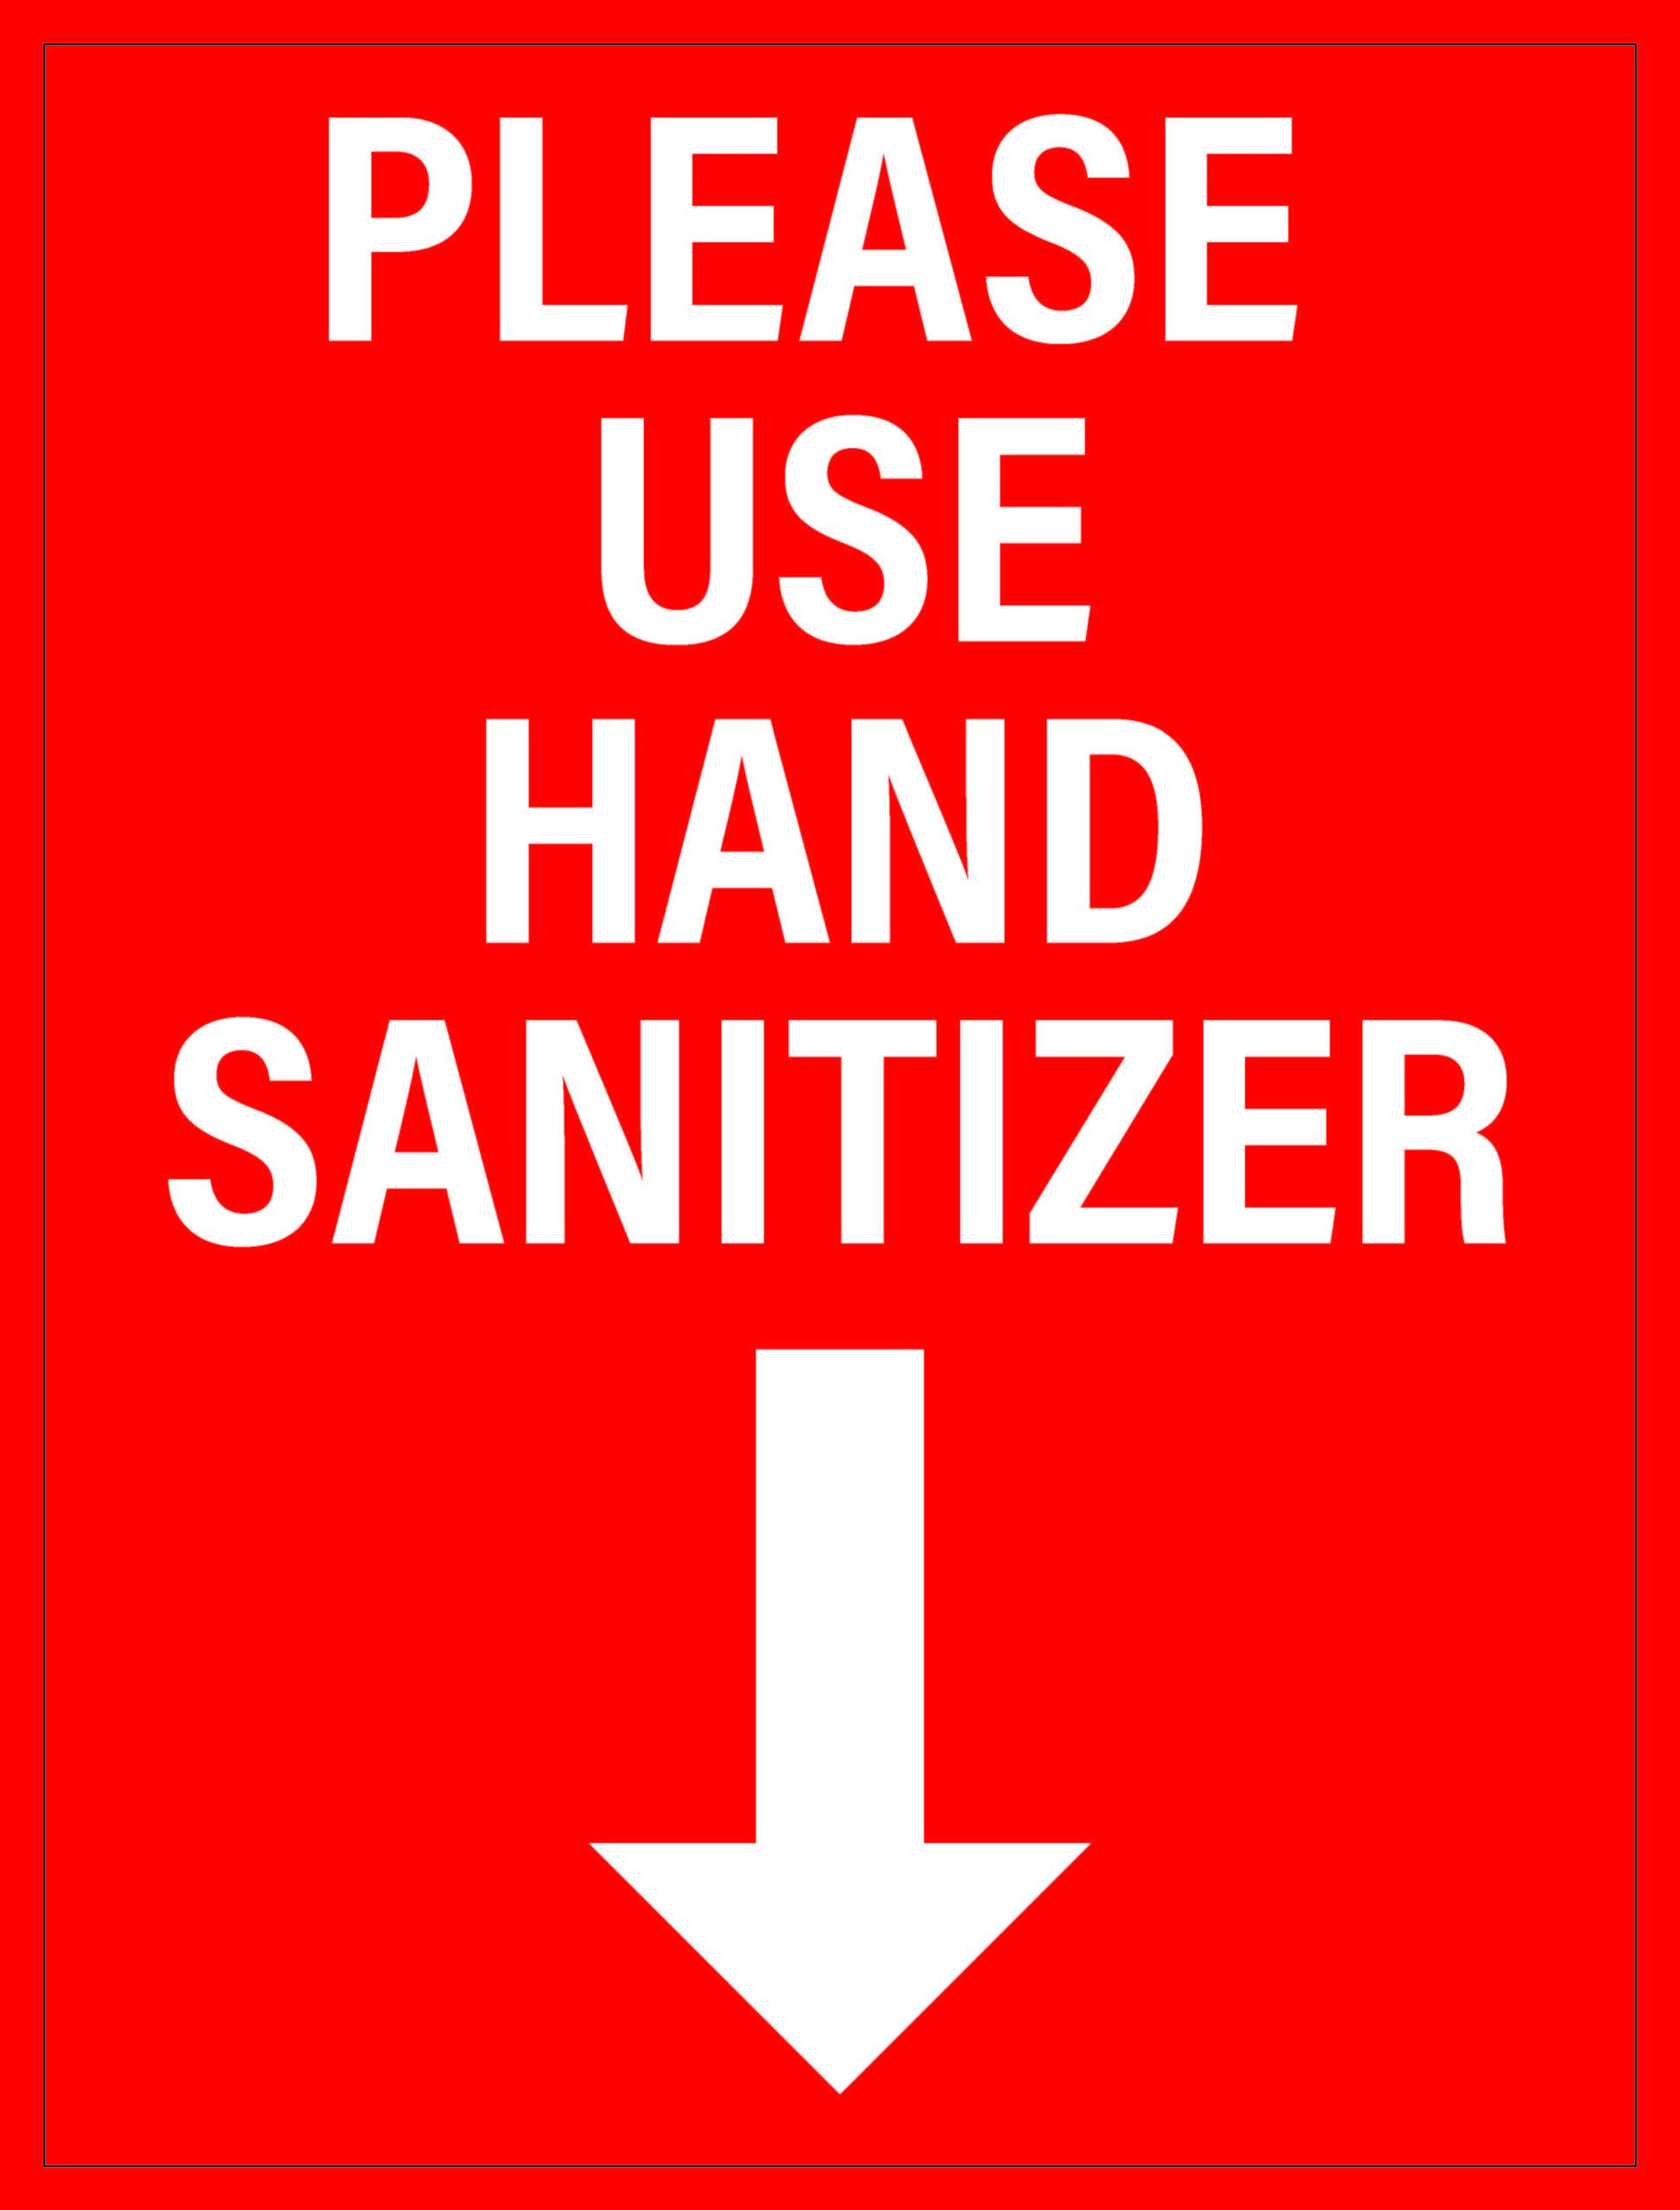 Sanitizer Stand Signs 18”x24”, printed on White Coroplast (for use anywhere)